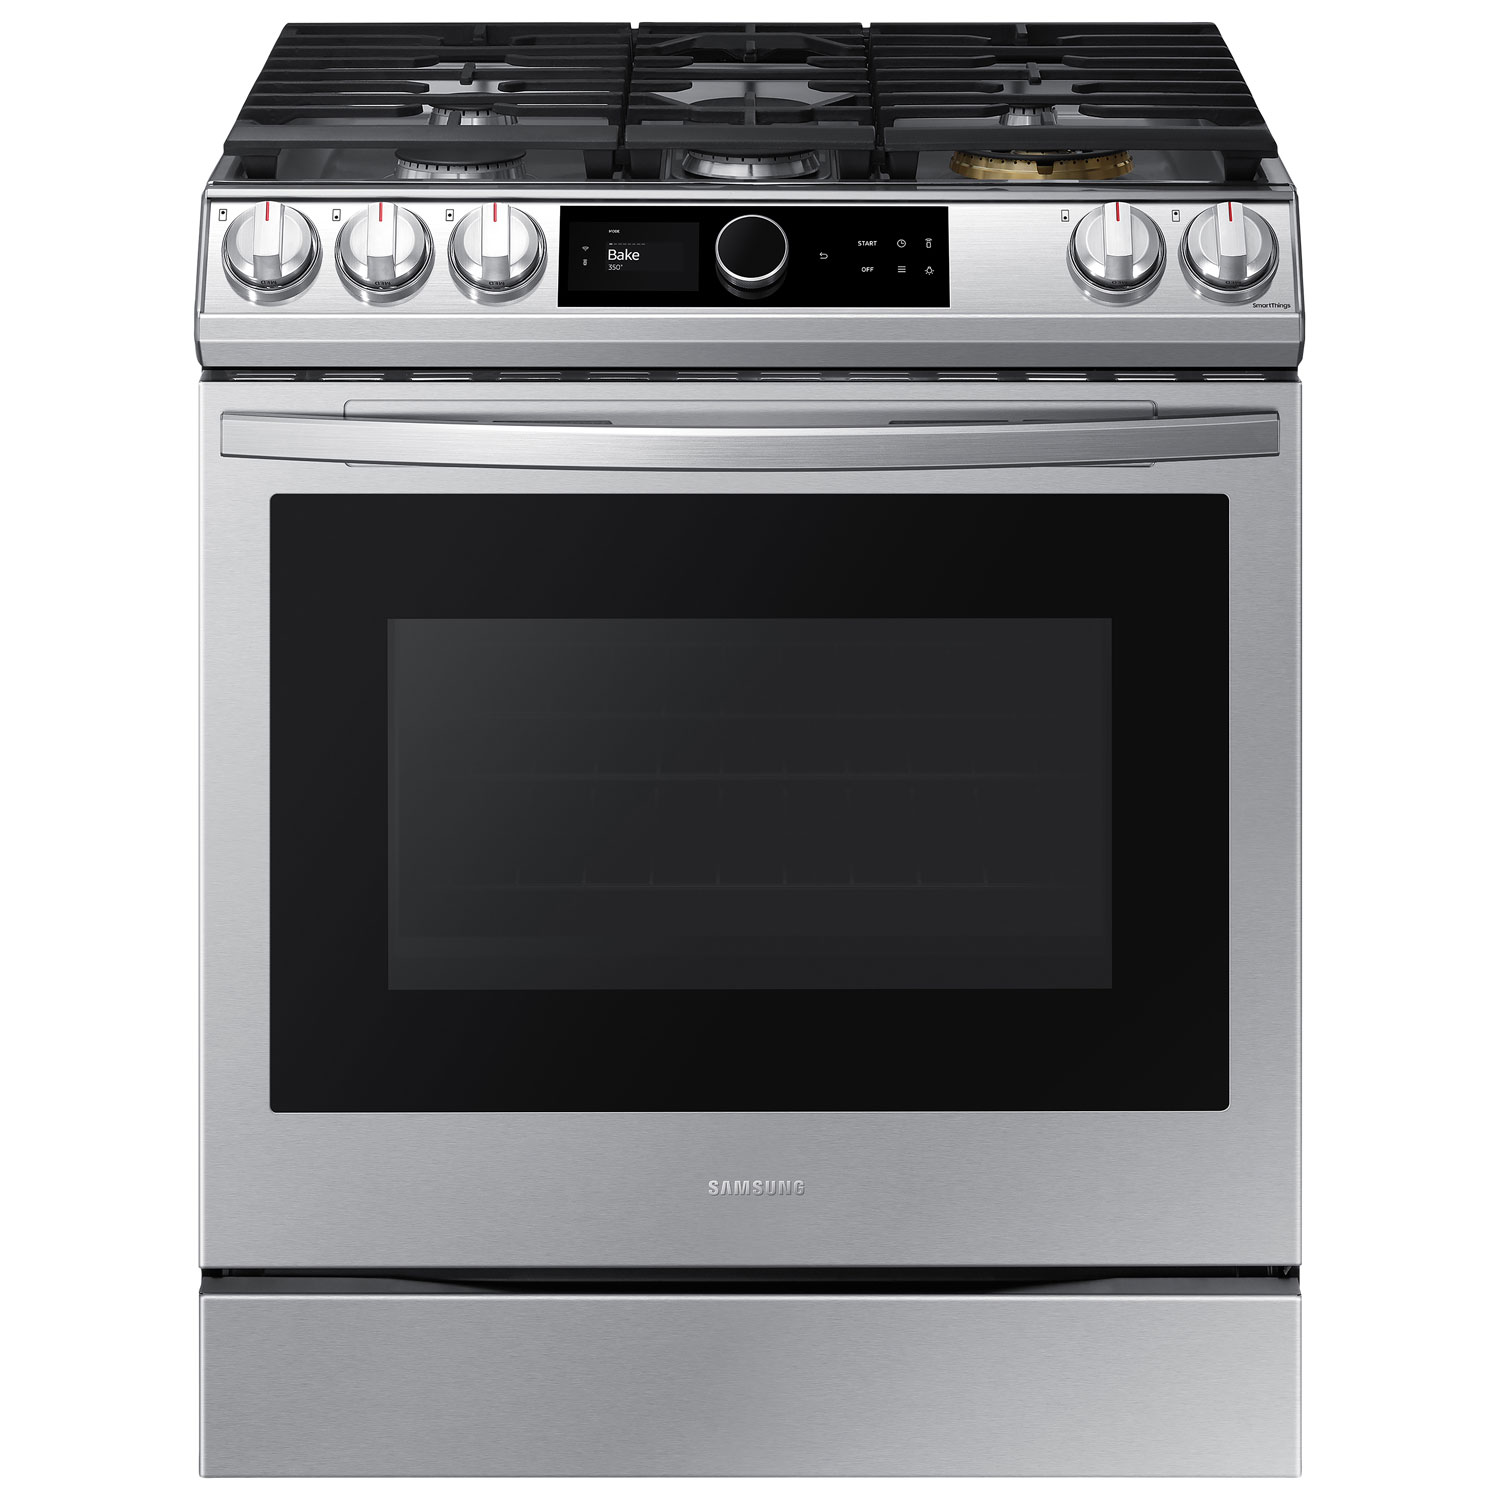 Samsung 30" 6.0 Cu. Ft. True Convection 5-Burner Slide-In Gas Air Fry Range (NX60T8711SS/AA) -Stainless